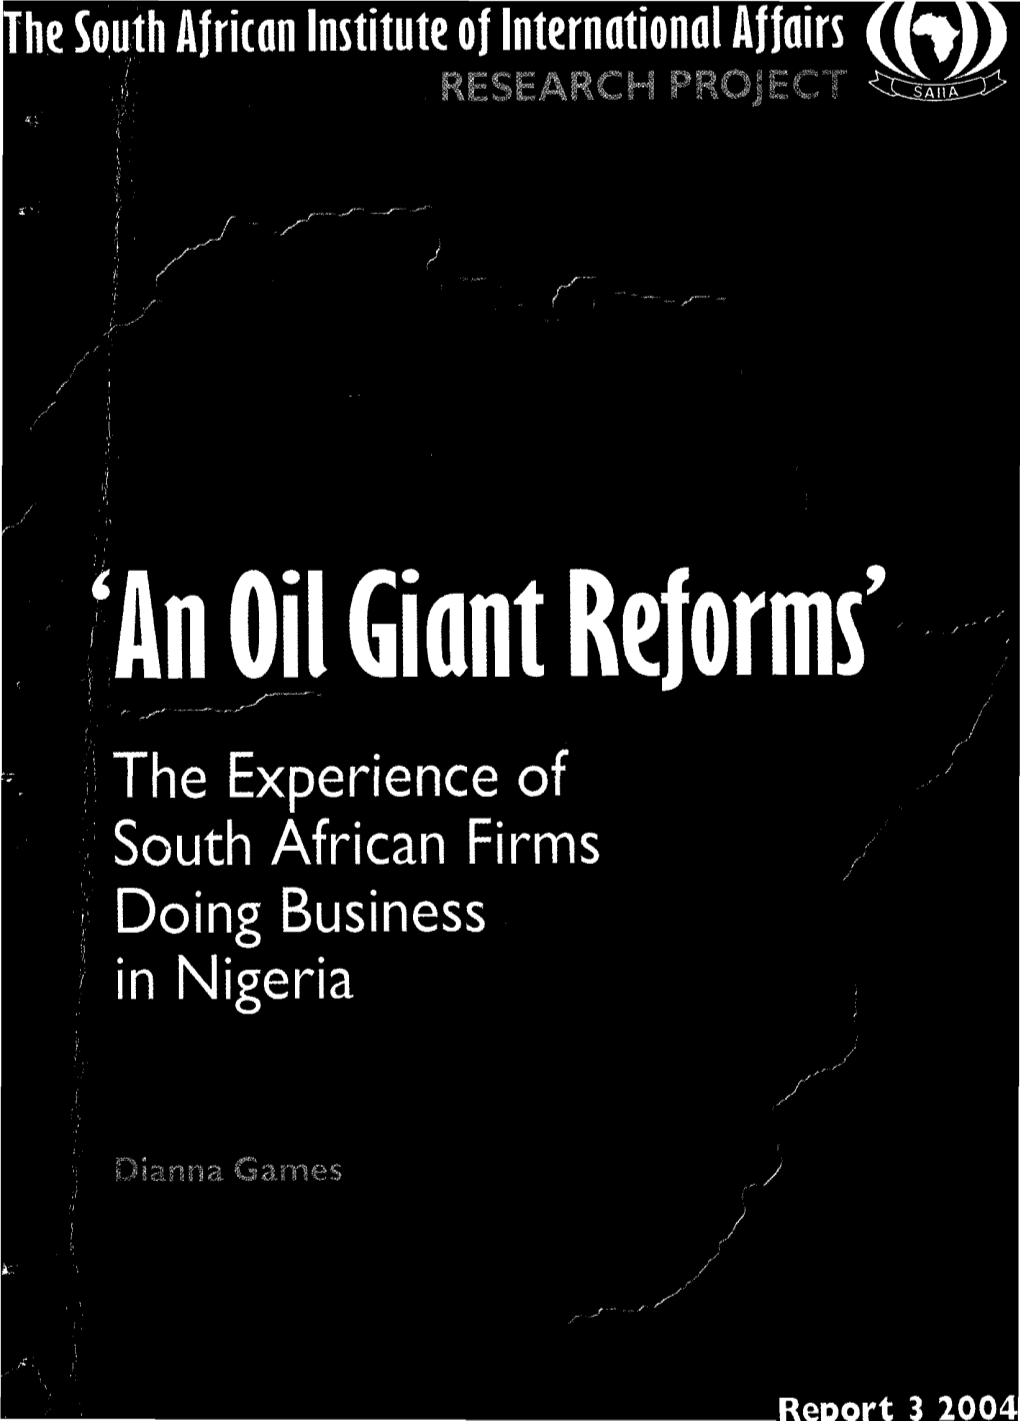 "An Oil Giant Reforms' the Experience of South African Firms Doing Business in Nigeria